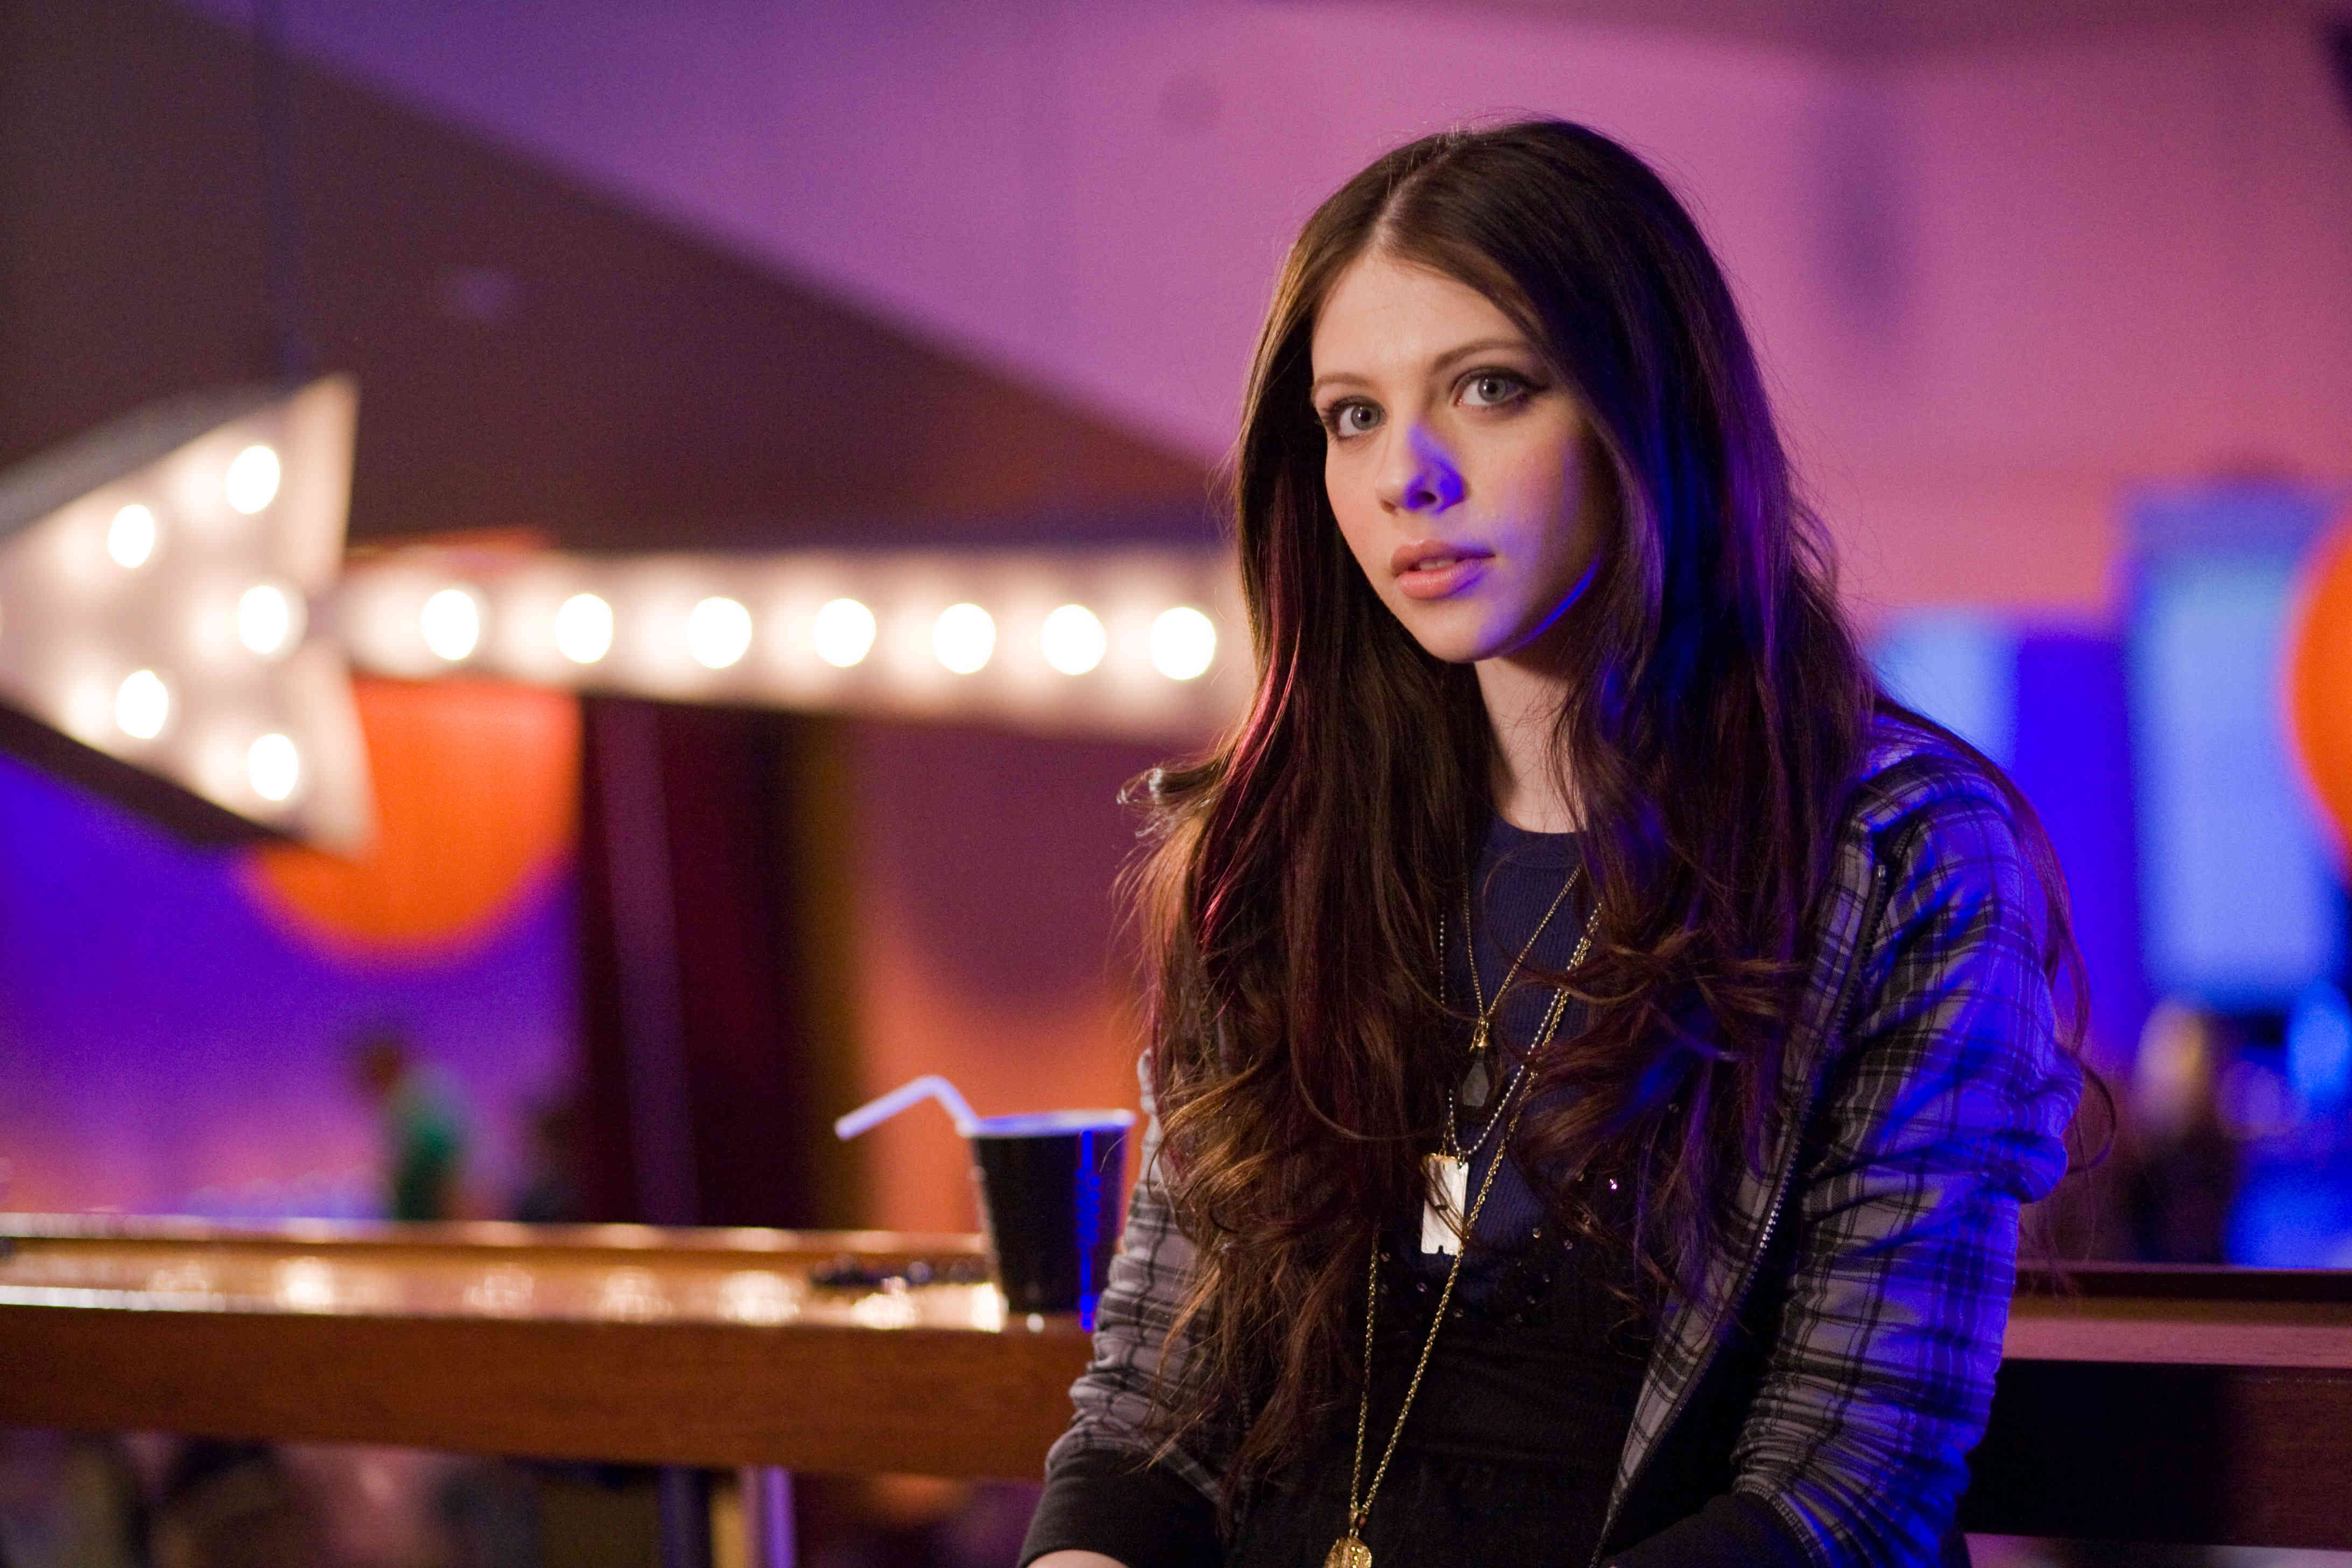 Michelle Trachtenberg stars as Maggie O'Donnell in New Line Cinema's 17 Again (2009)